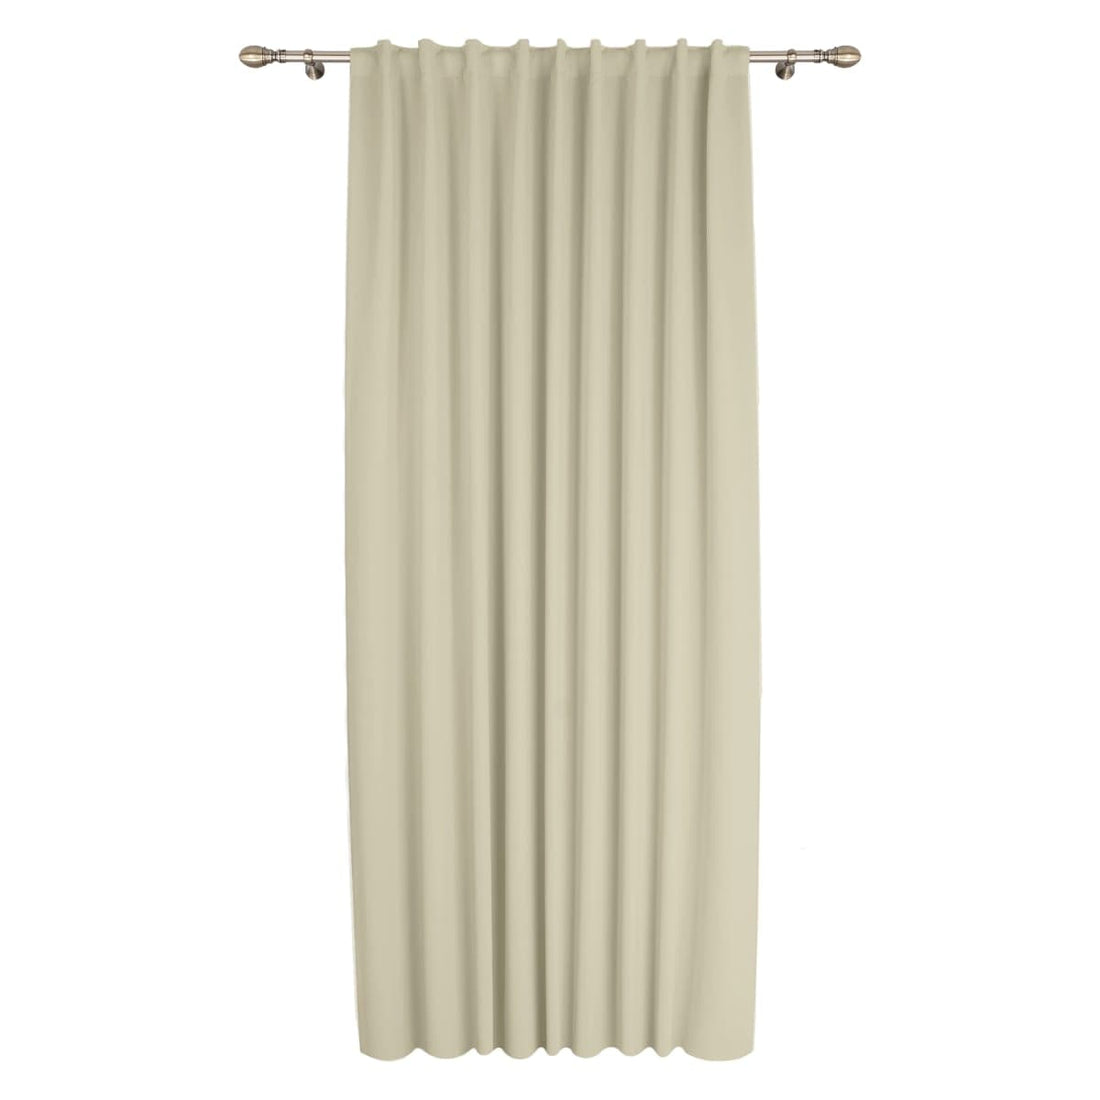 BEIGE OPAQUE CAROL CURTAIN 200X280 CM WEBBING AND CONCEALED HANGING LOOP - best price from Maltashopper.com BR480009481